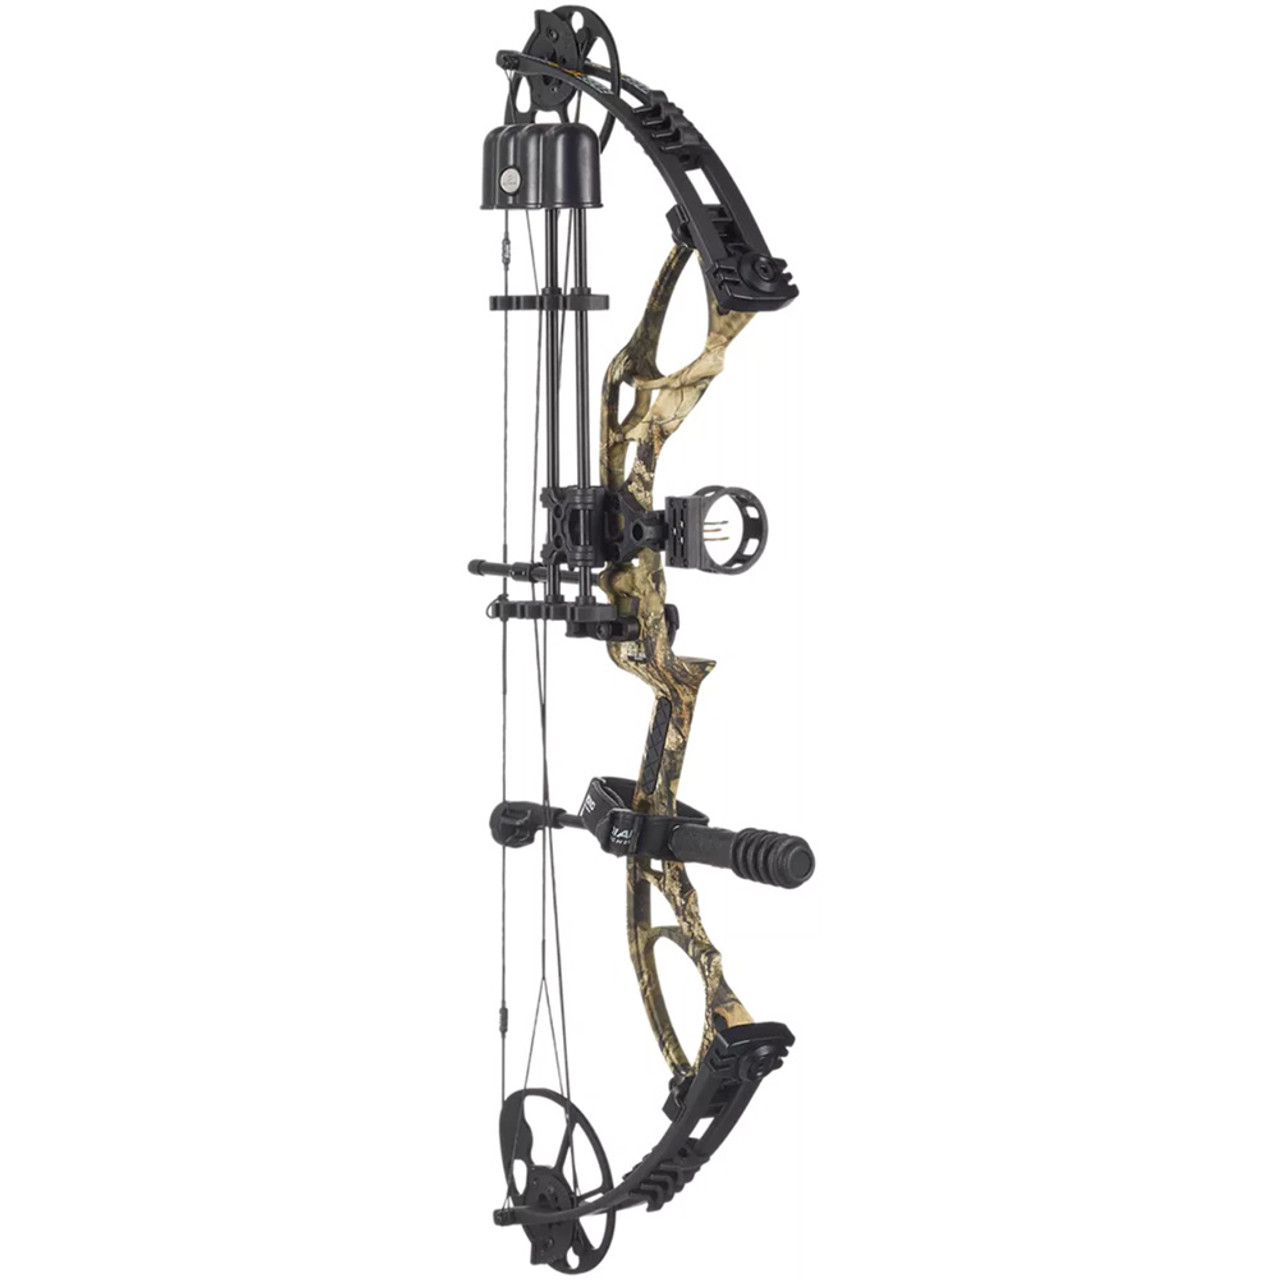 31in in. Draw Length Archery Compound Bows 55lbs lbs. Draw Weight